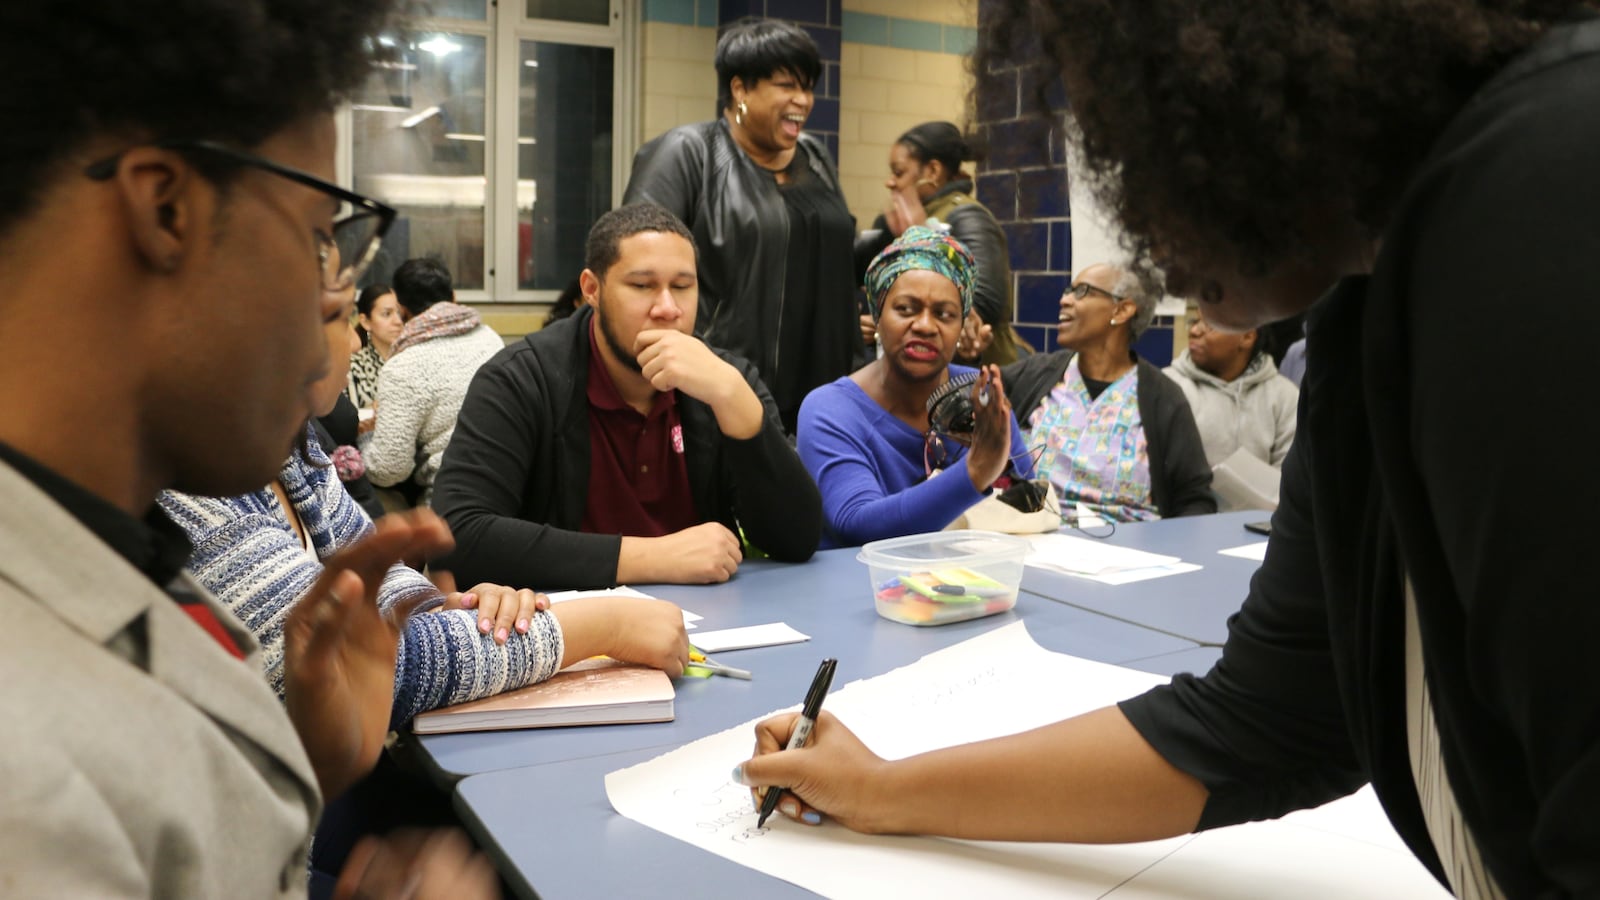 Newark residents wrote down challenges and opportunities in the district during Wednesday’s forum.